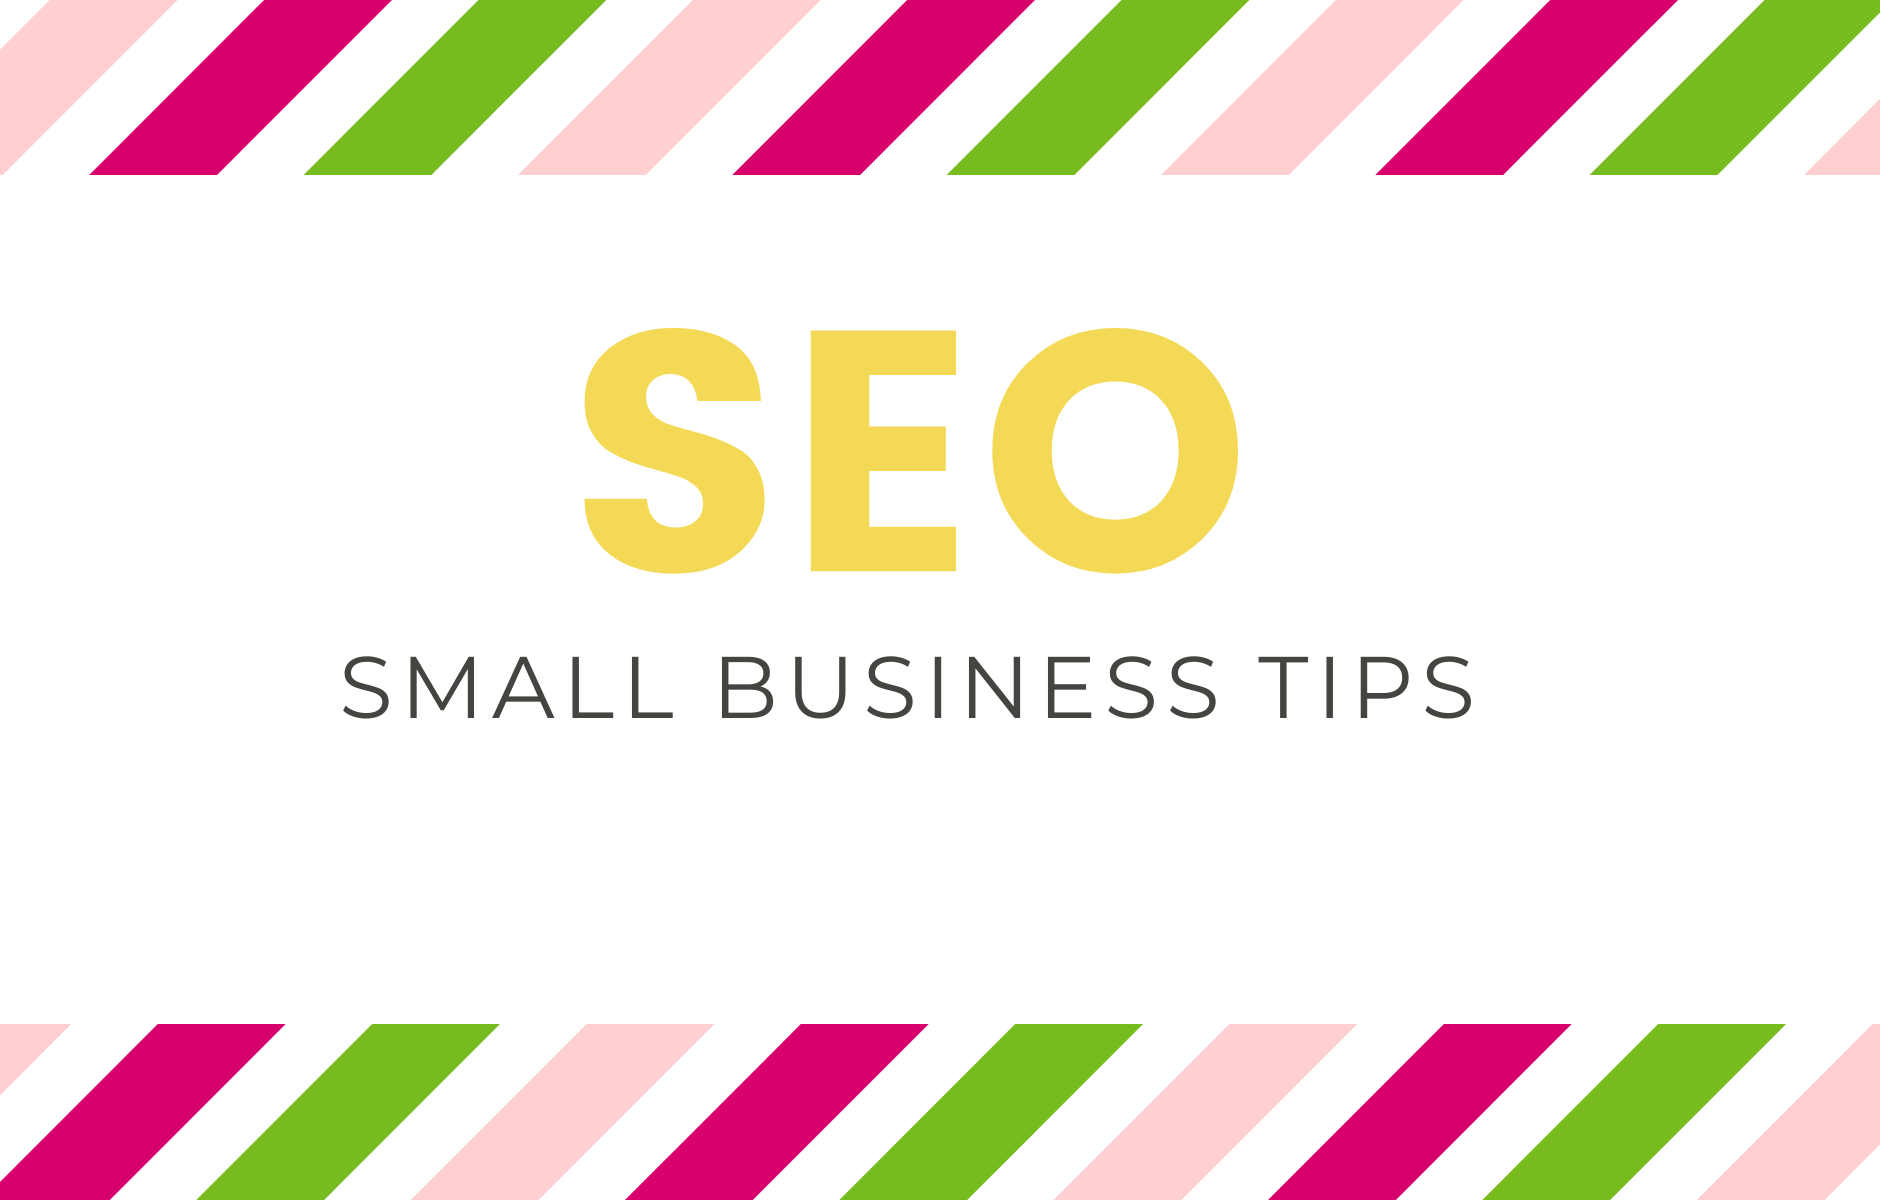 SEO small business tips